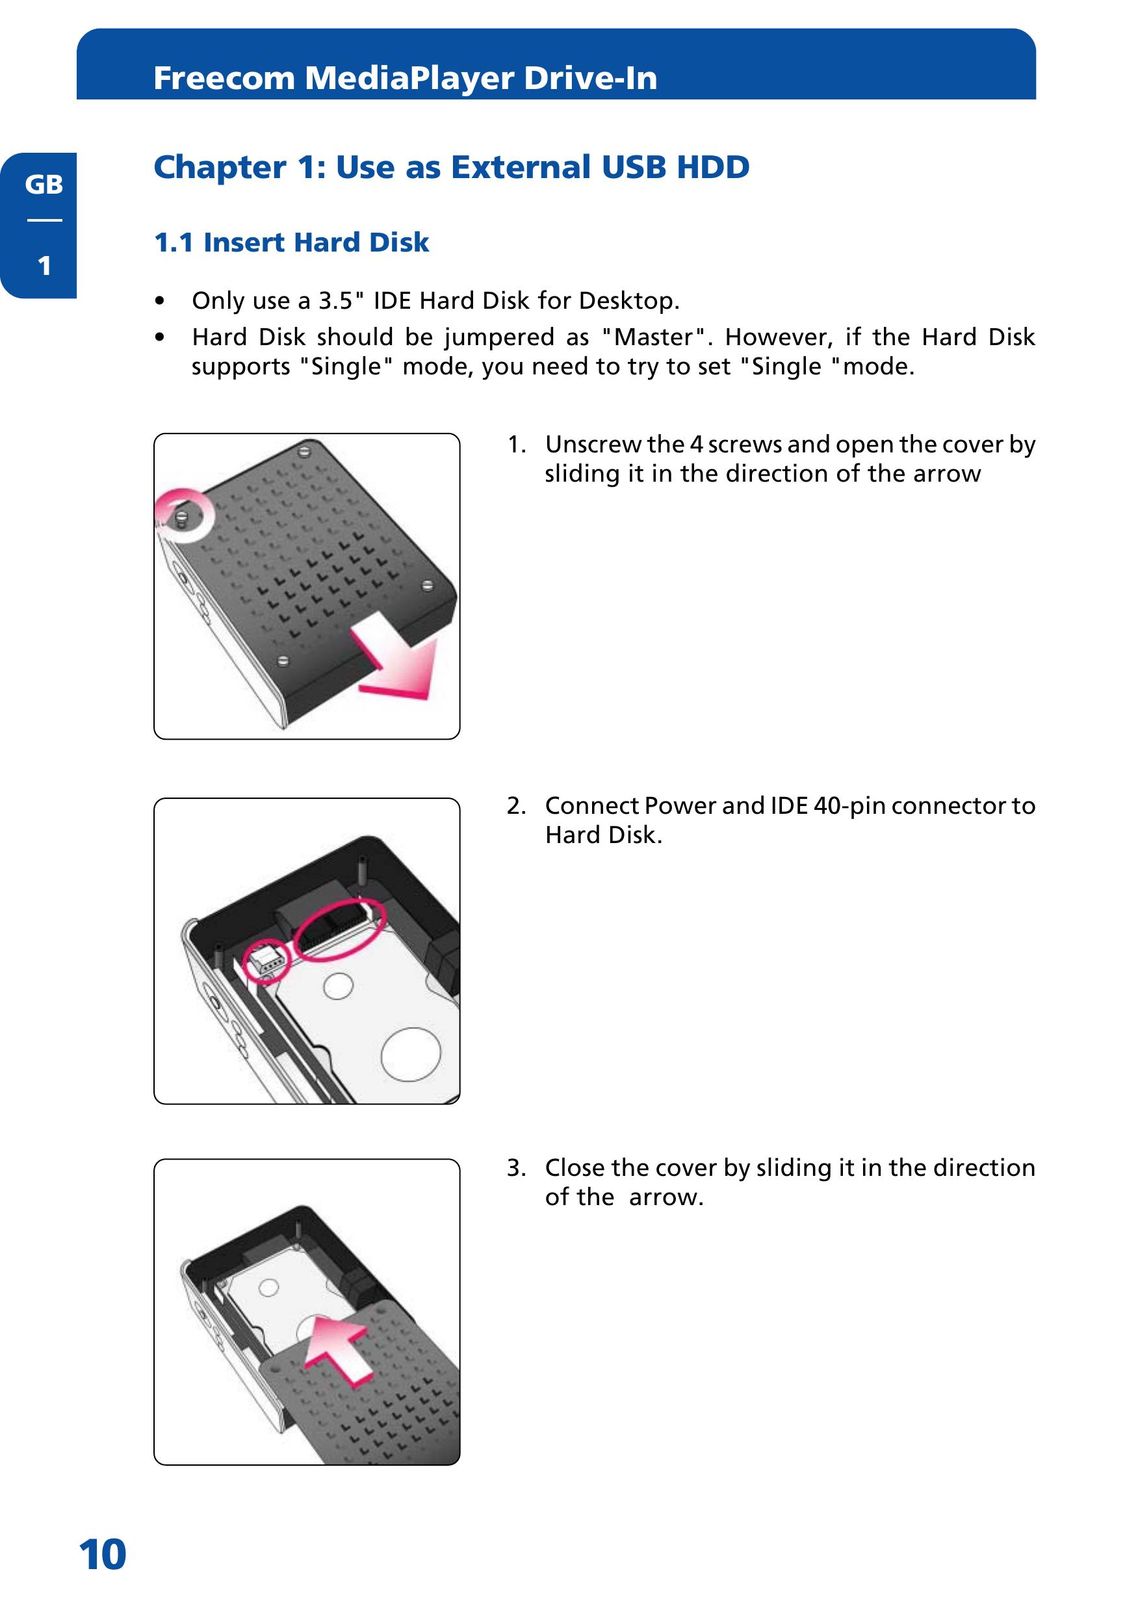 Freecom Technologies MediaPlayer Drive-In Kit Portable Multimedia Player User Manual (Page 10)